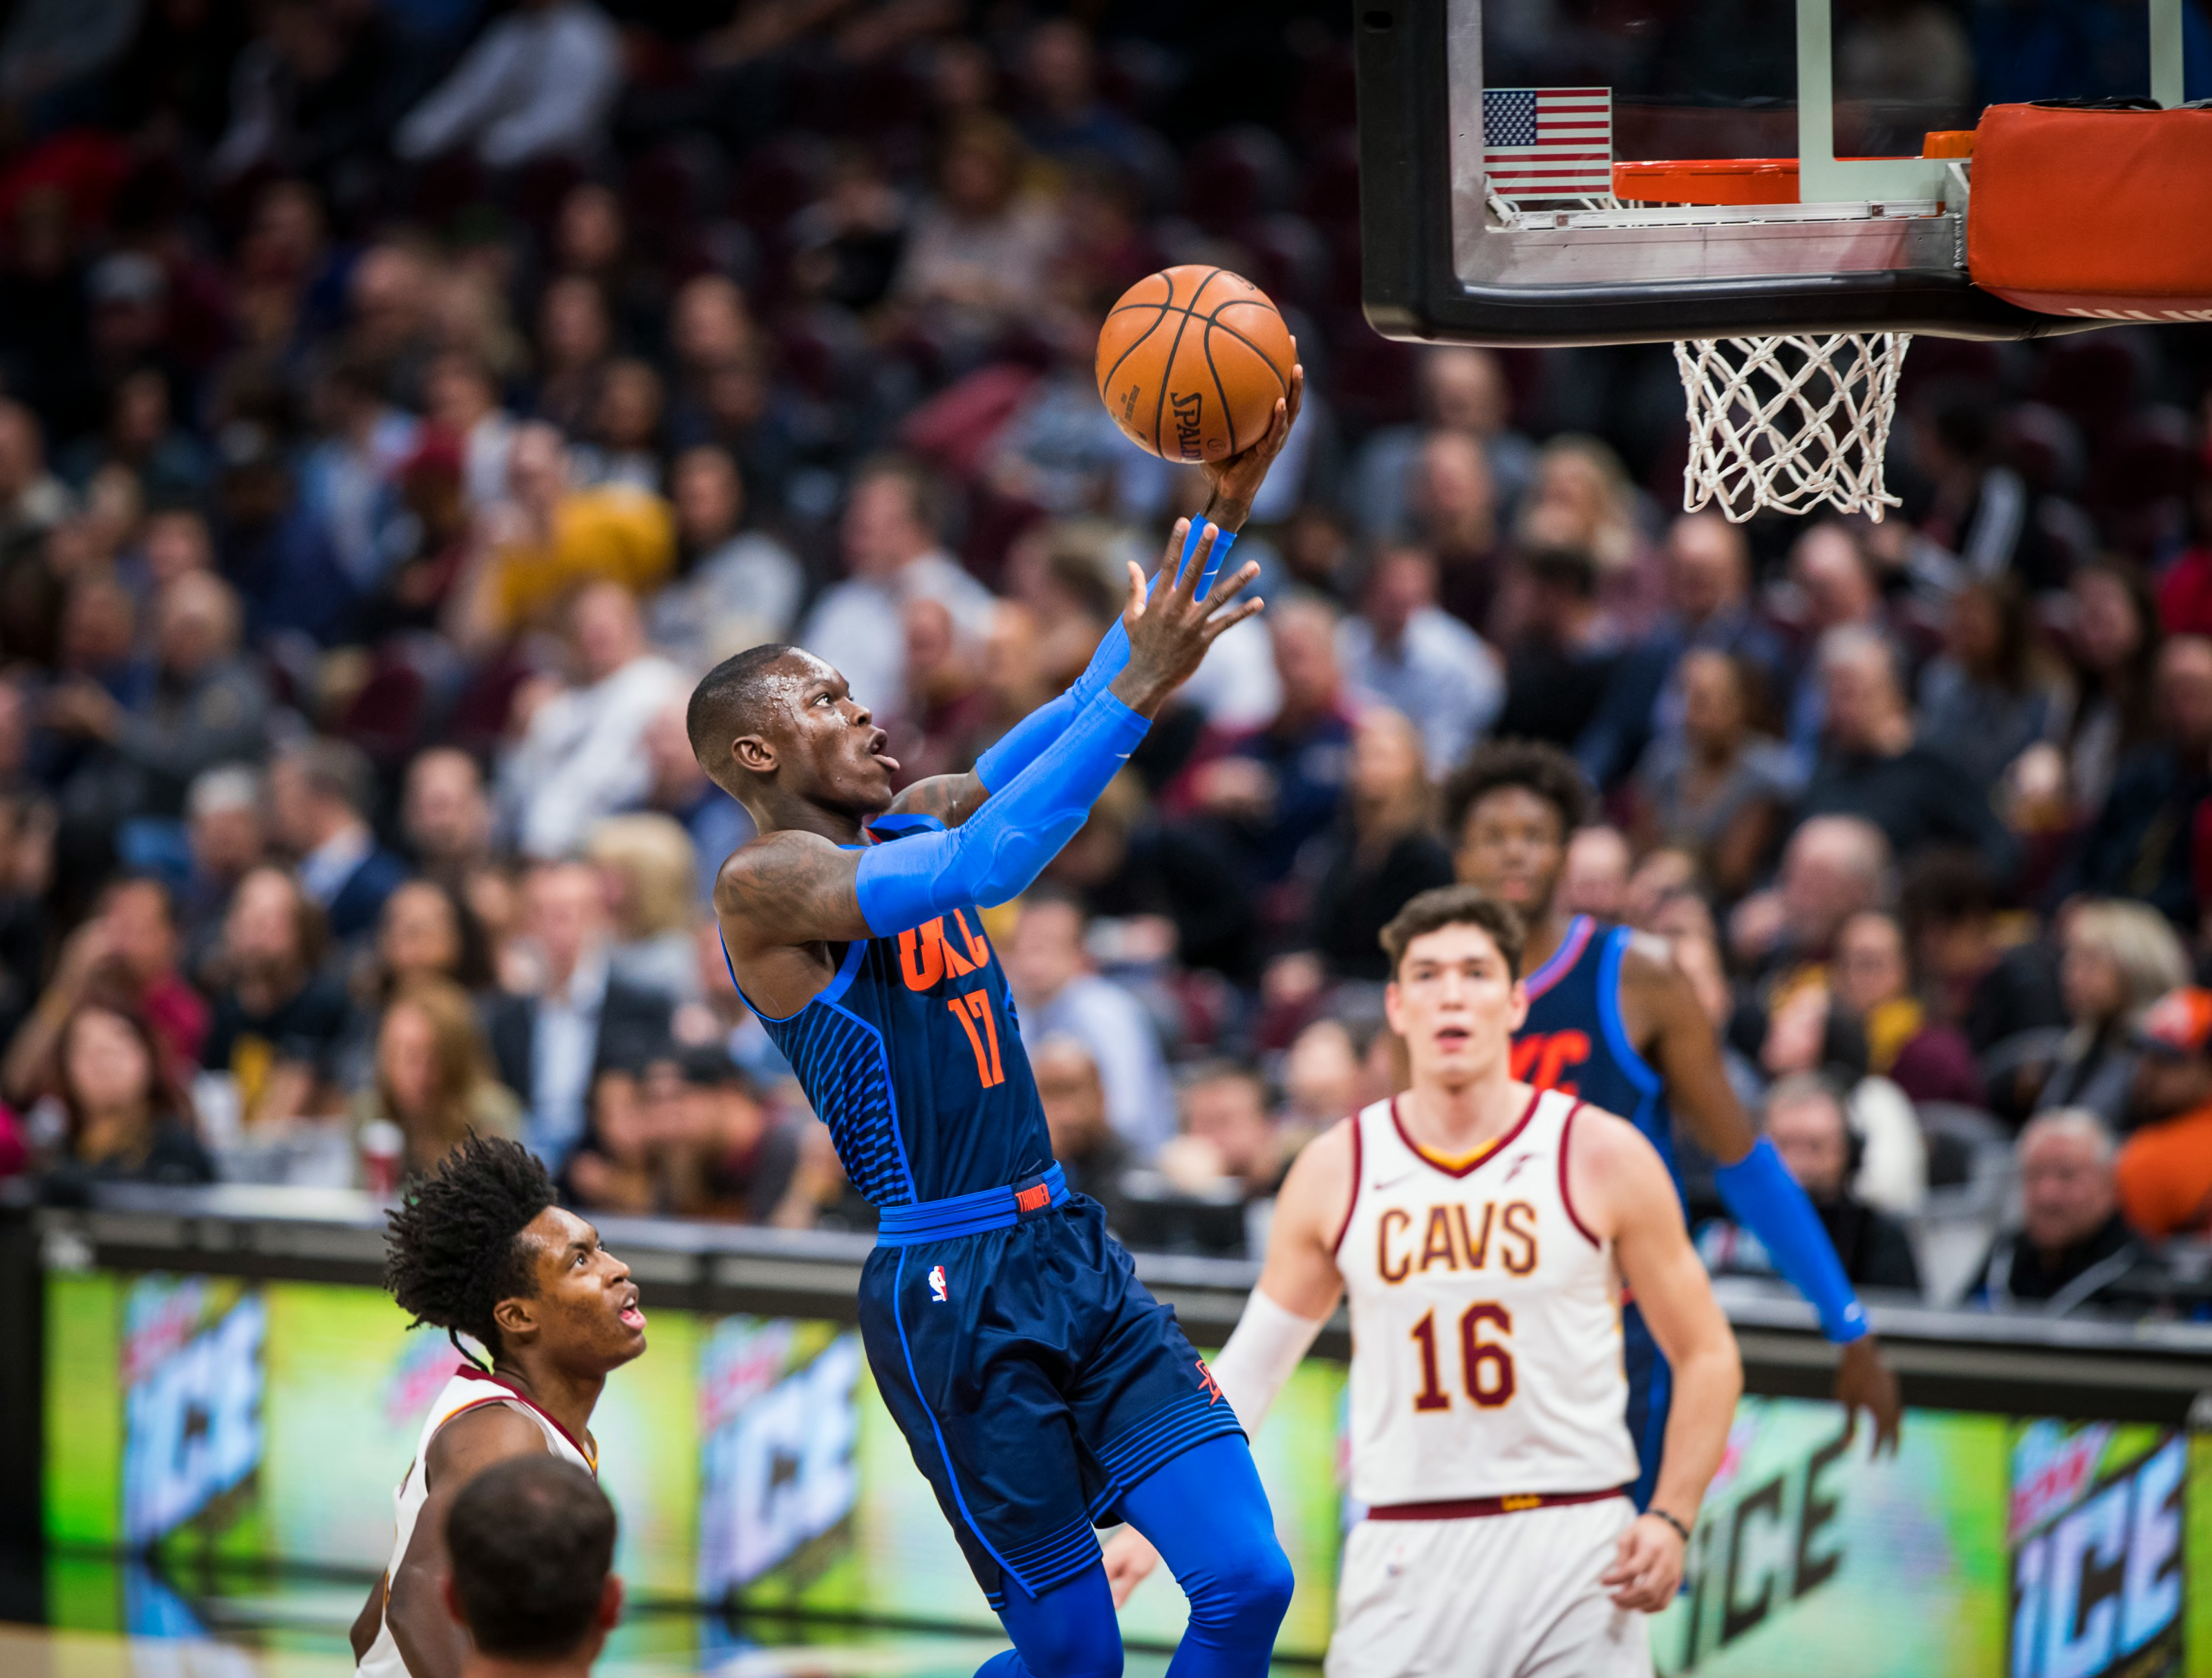 Game Preview how OKC Thunder can top the Cavs for an effortless win